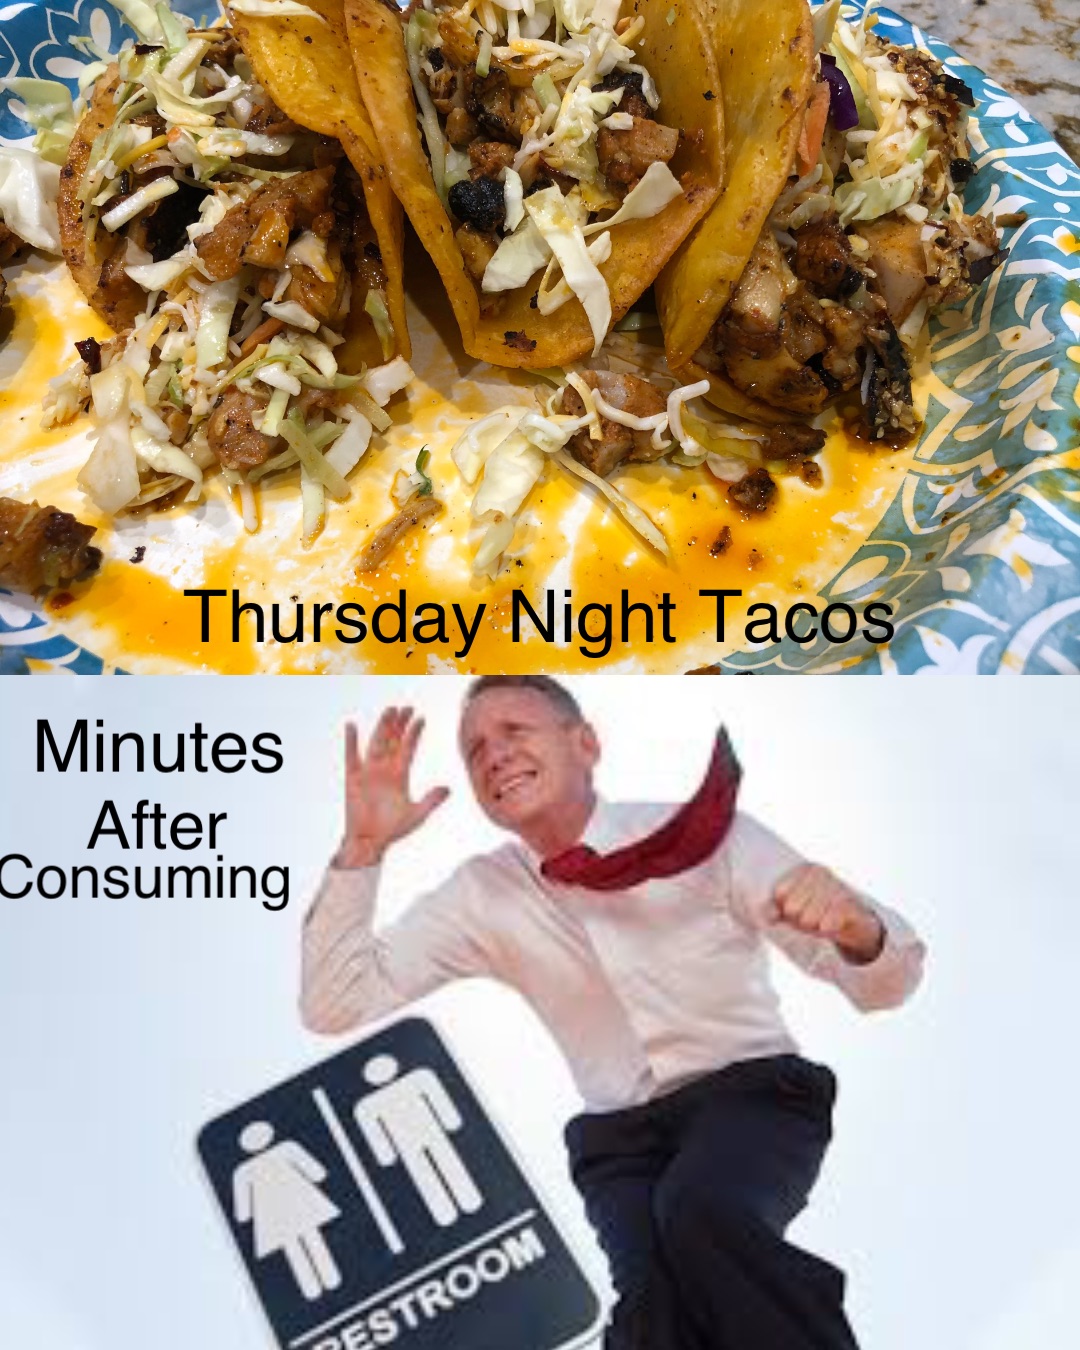 Thursday Night Tacos Minutes After Consuming